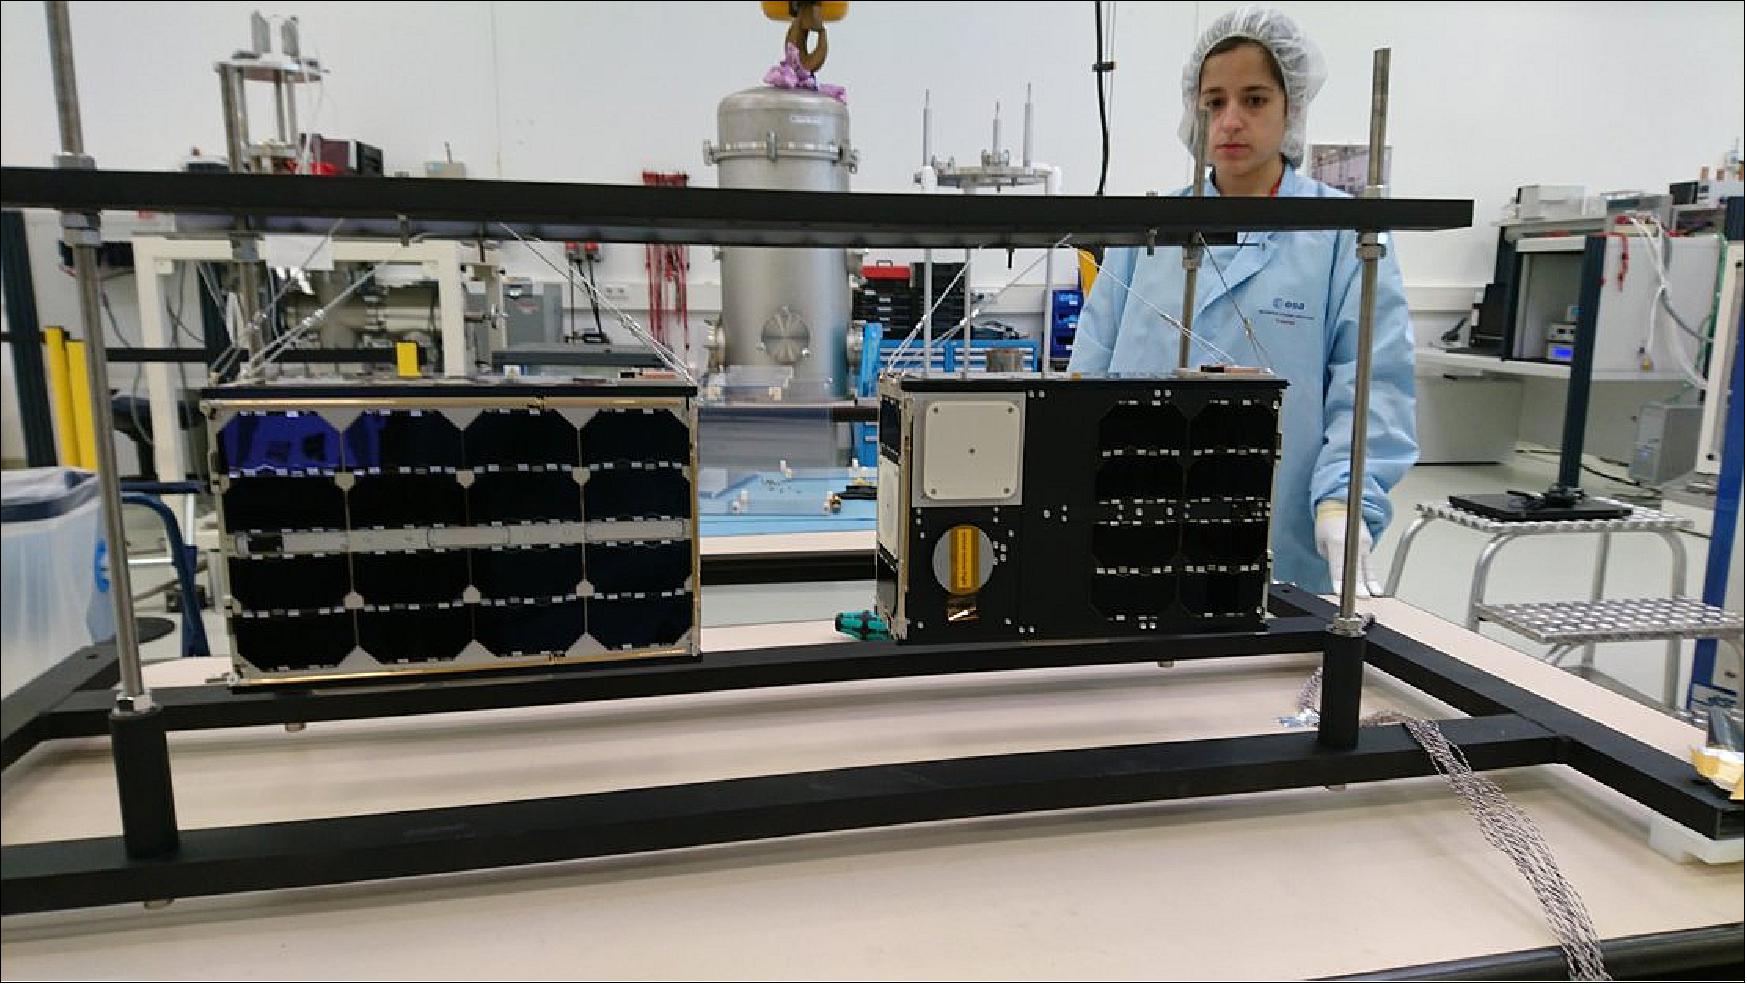 Figure 6: This photo depicts the two GOMX-4 satellites in the test facilities of ESA/ESTEC about to undergo thermal–vacuum testing (image credit: ESA, GomSpace)